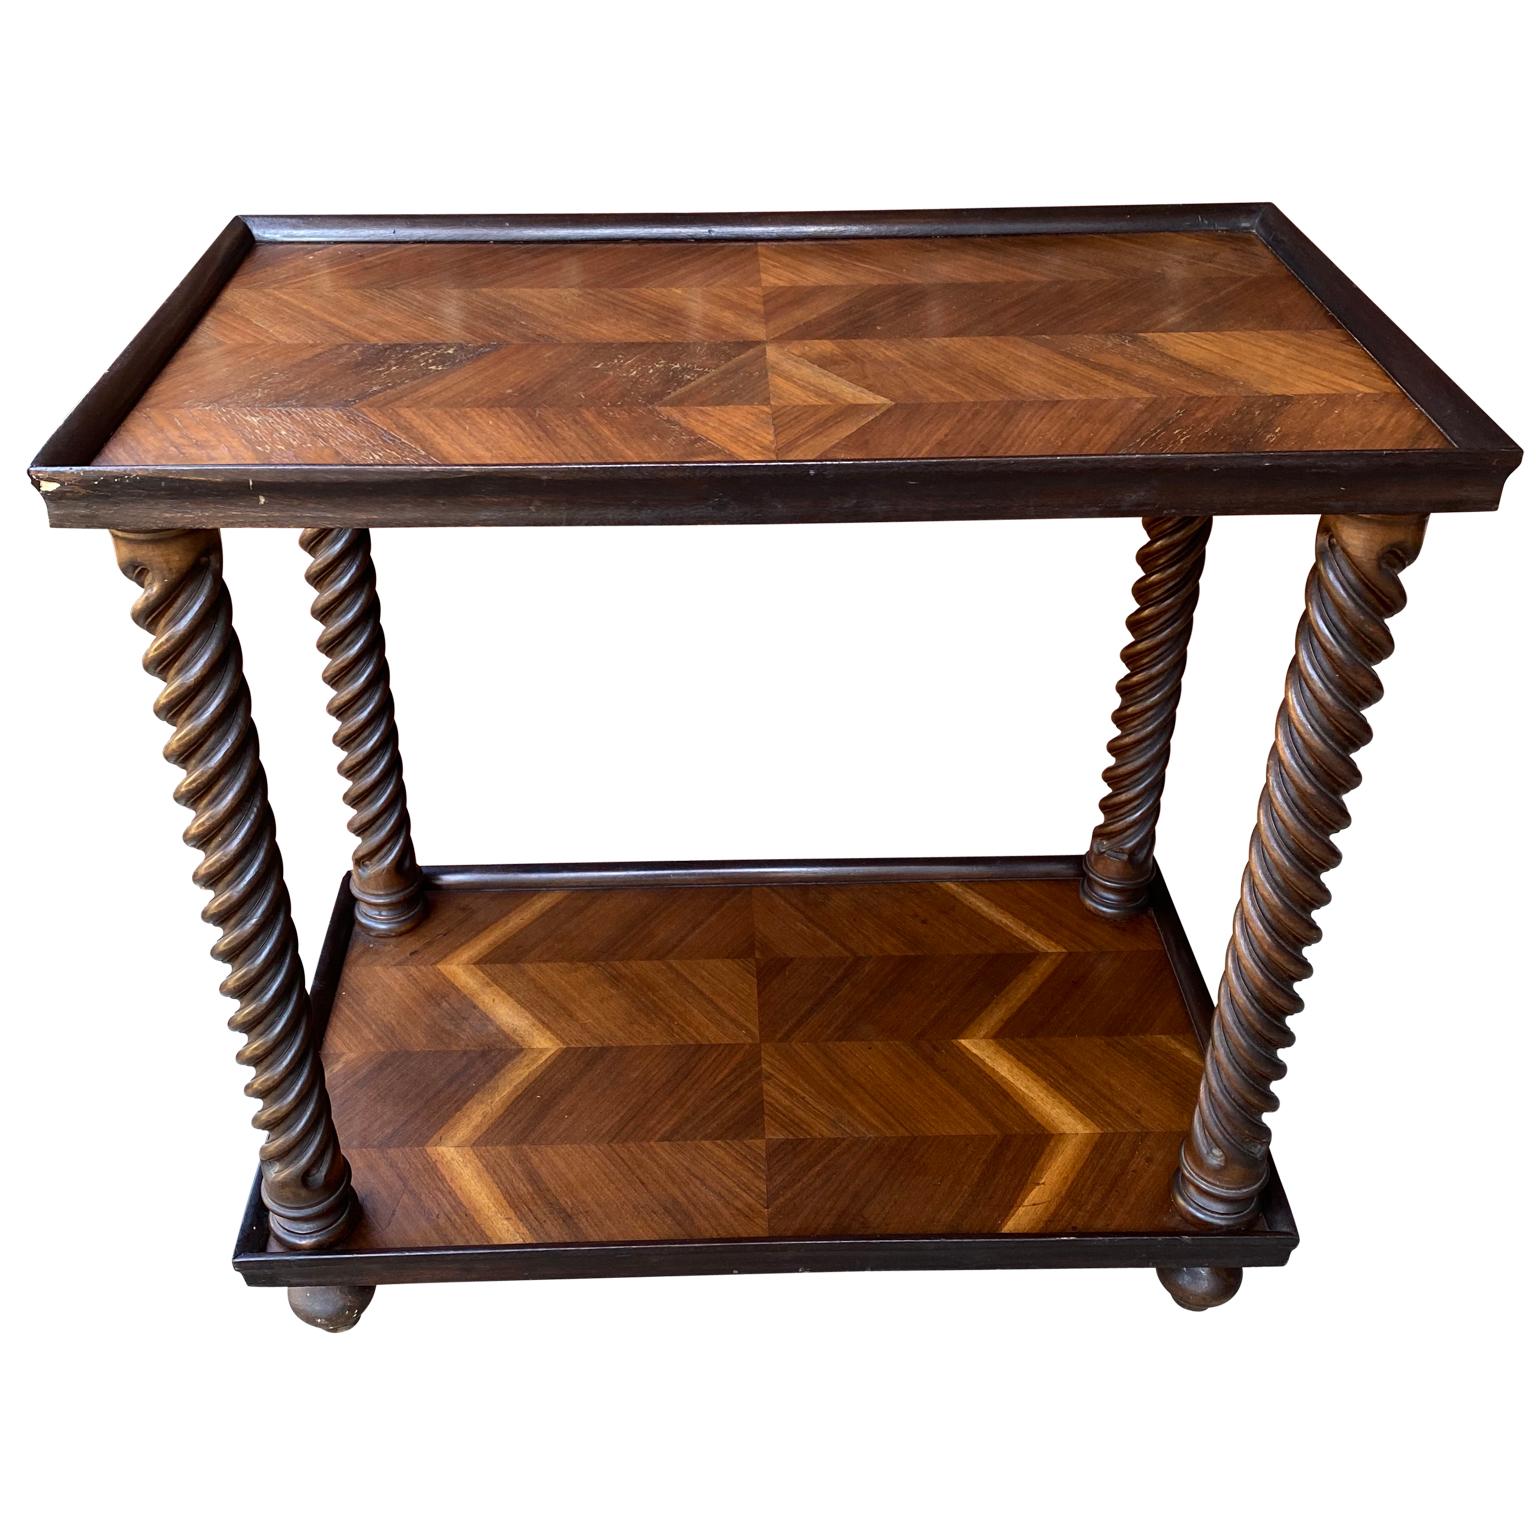 Italian 19th Century wooden inlaid two-tier bar cart.